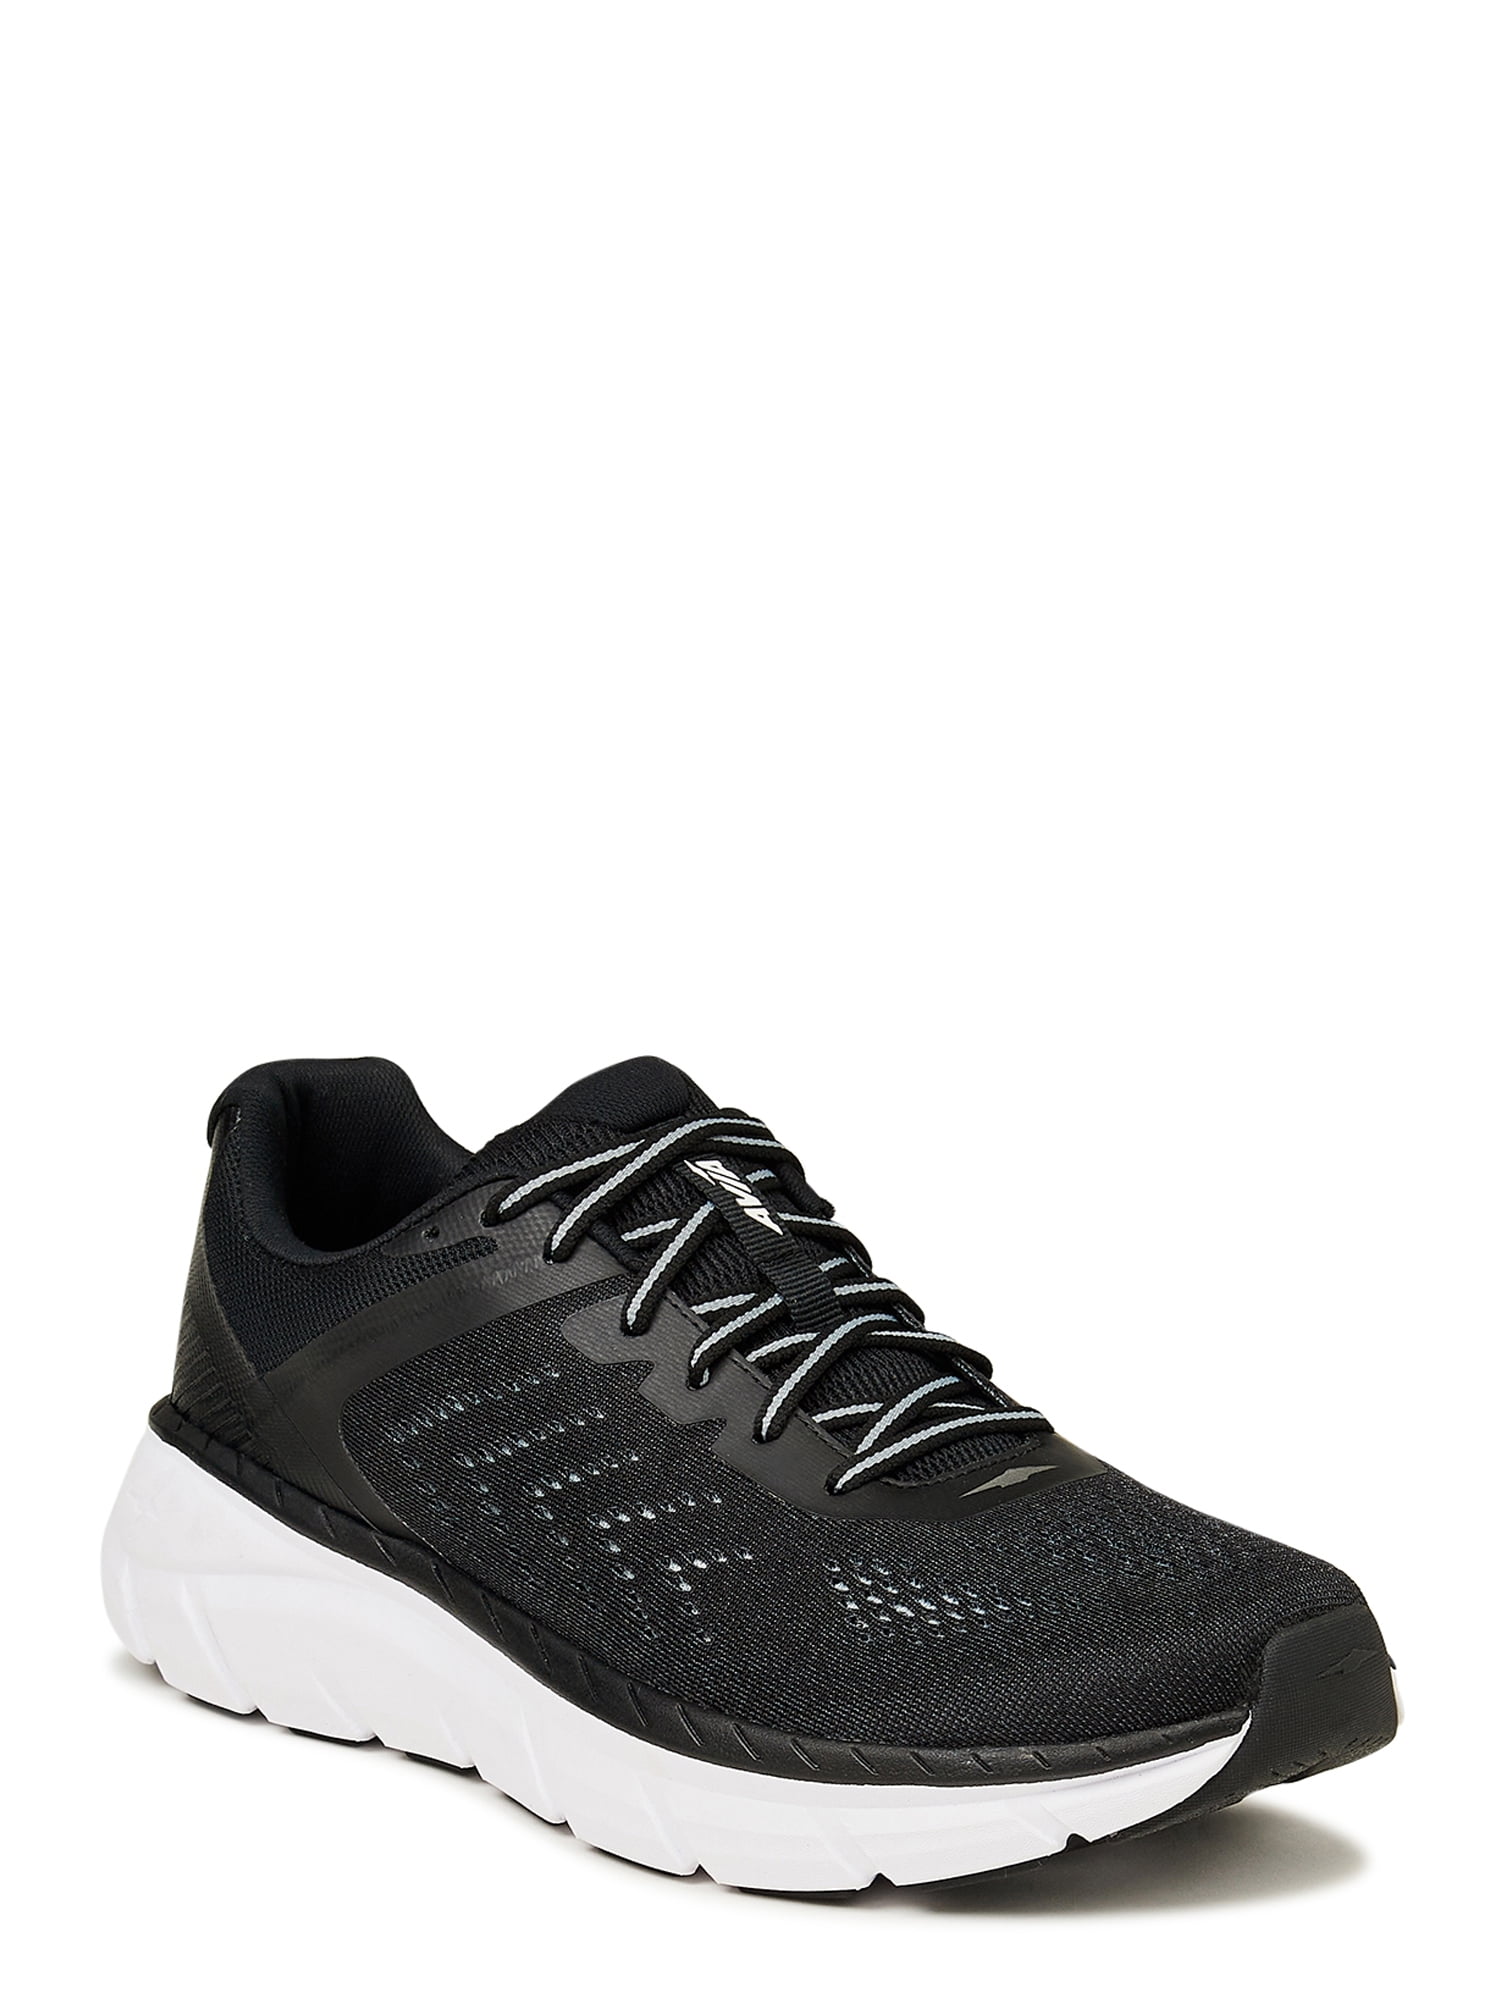 Avia Men's Hightail Athletic Performance Running Shoes